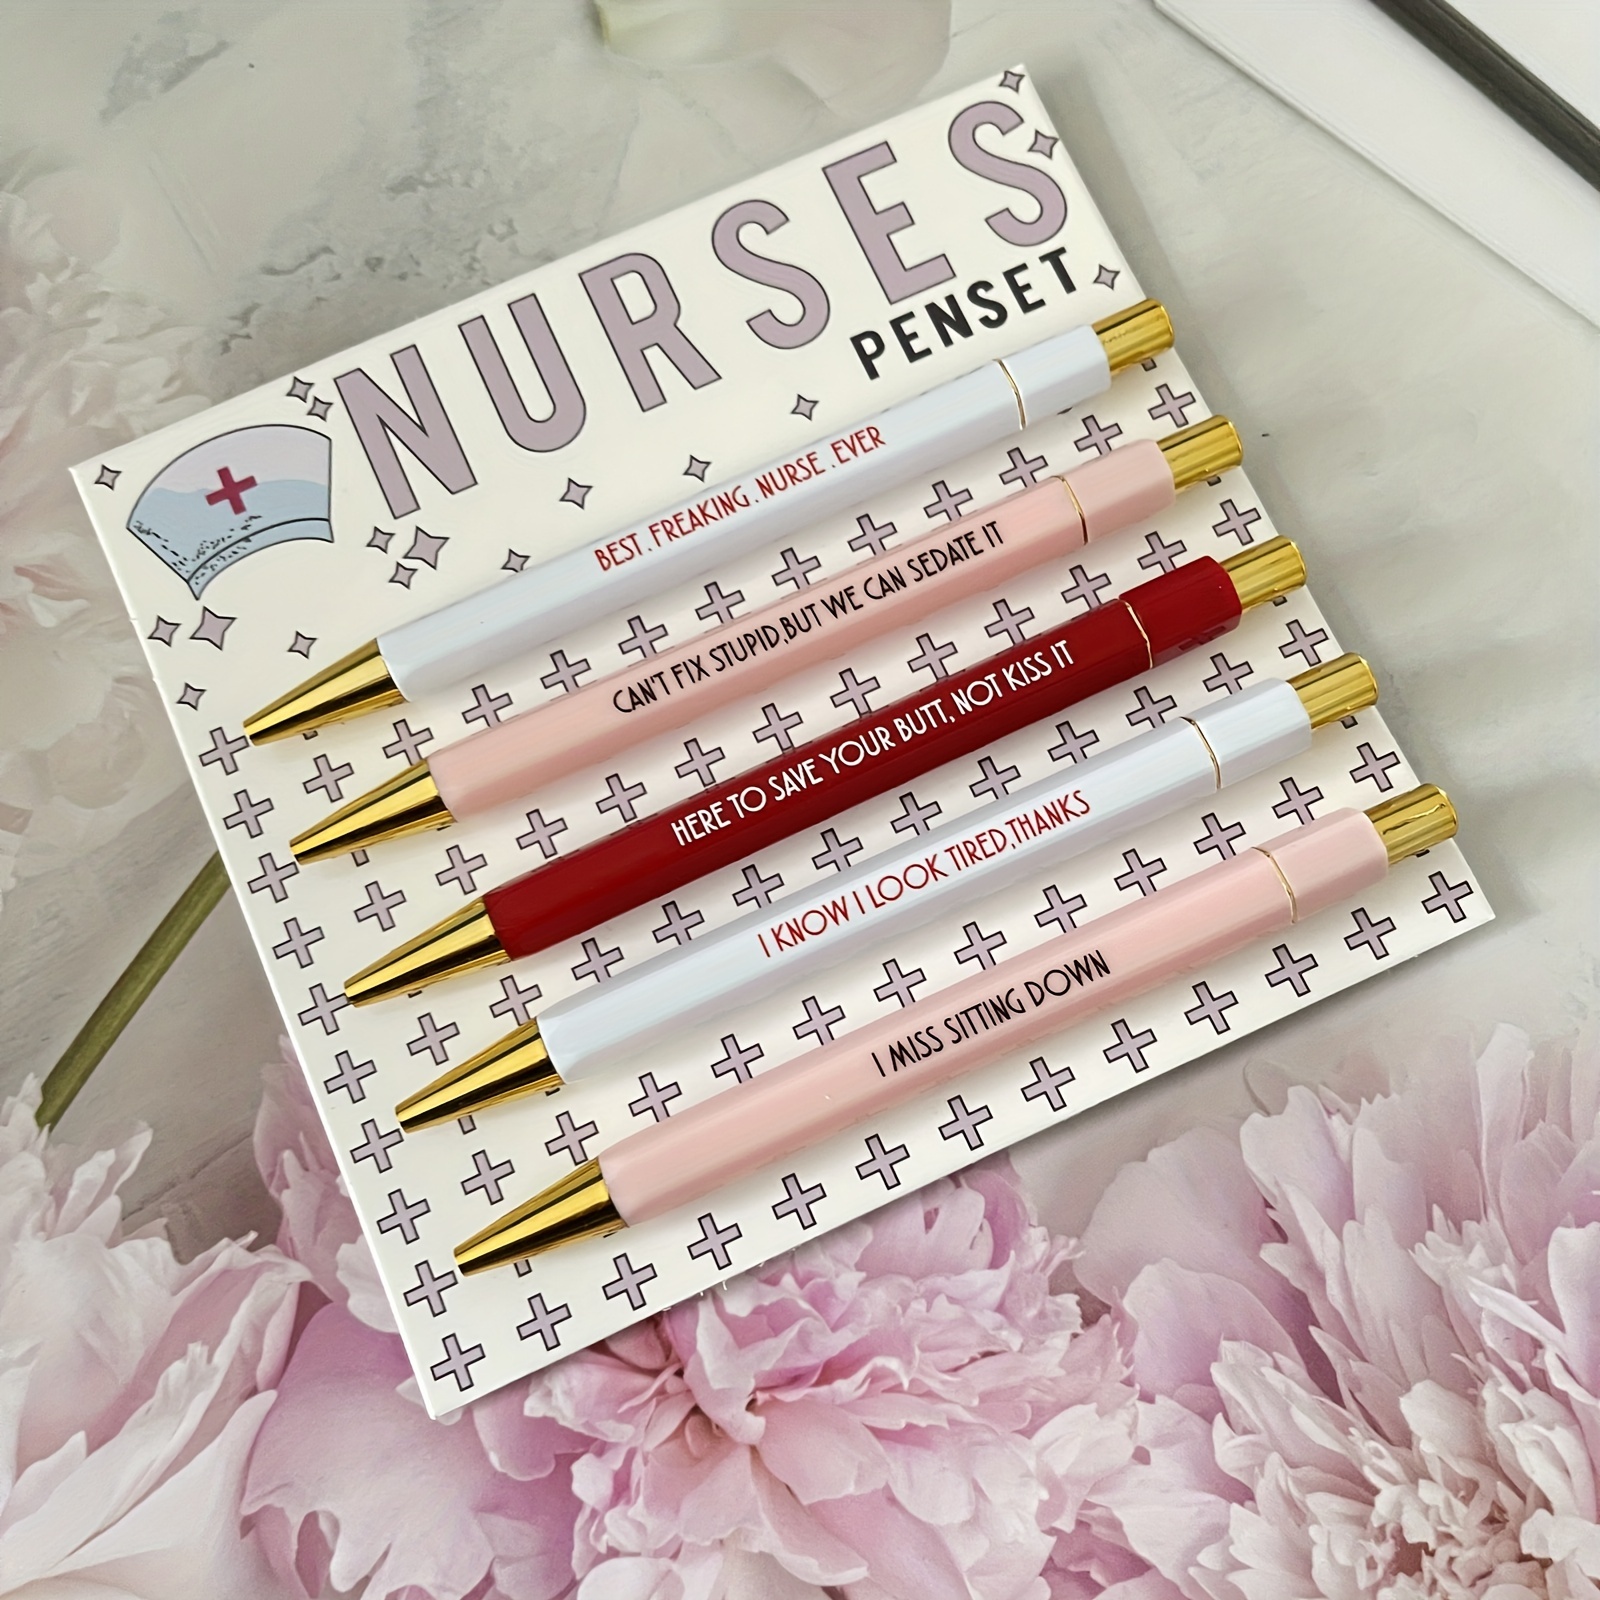 11 Pcs Funny Pens Novelty Daily Pen Set Gift for Coworkers Nurses